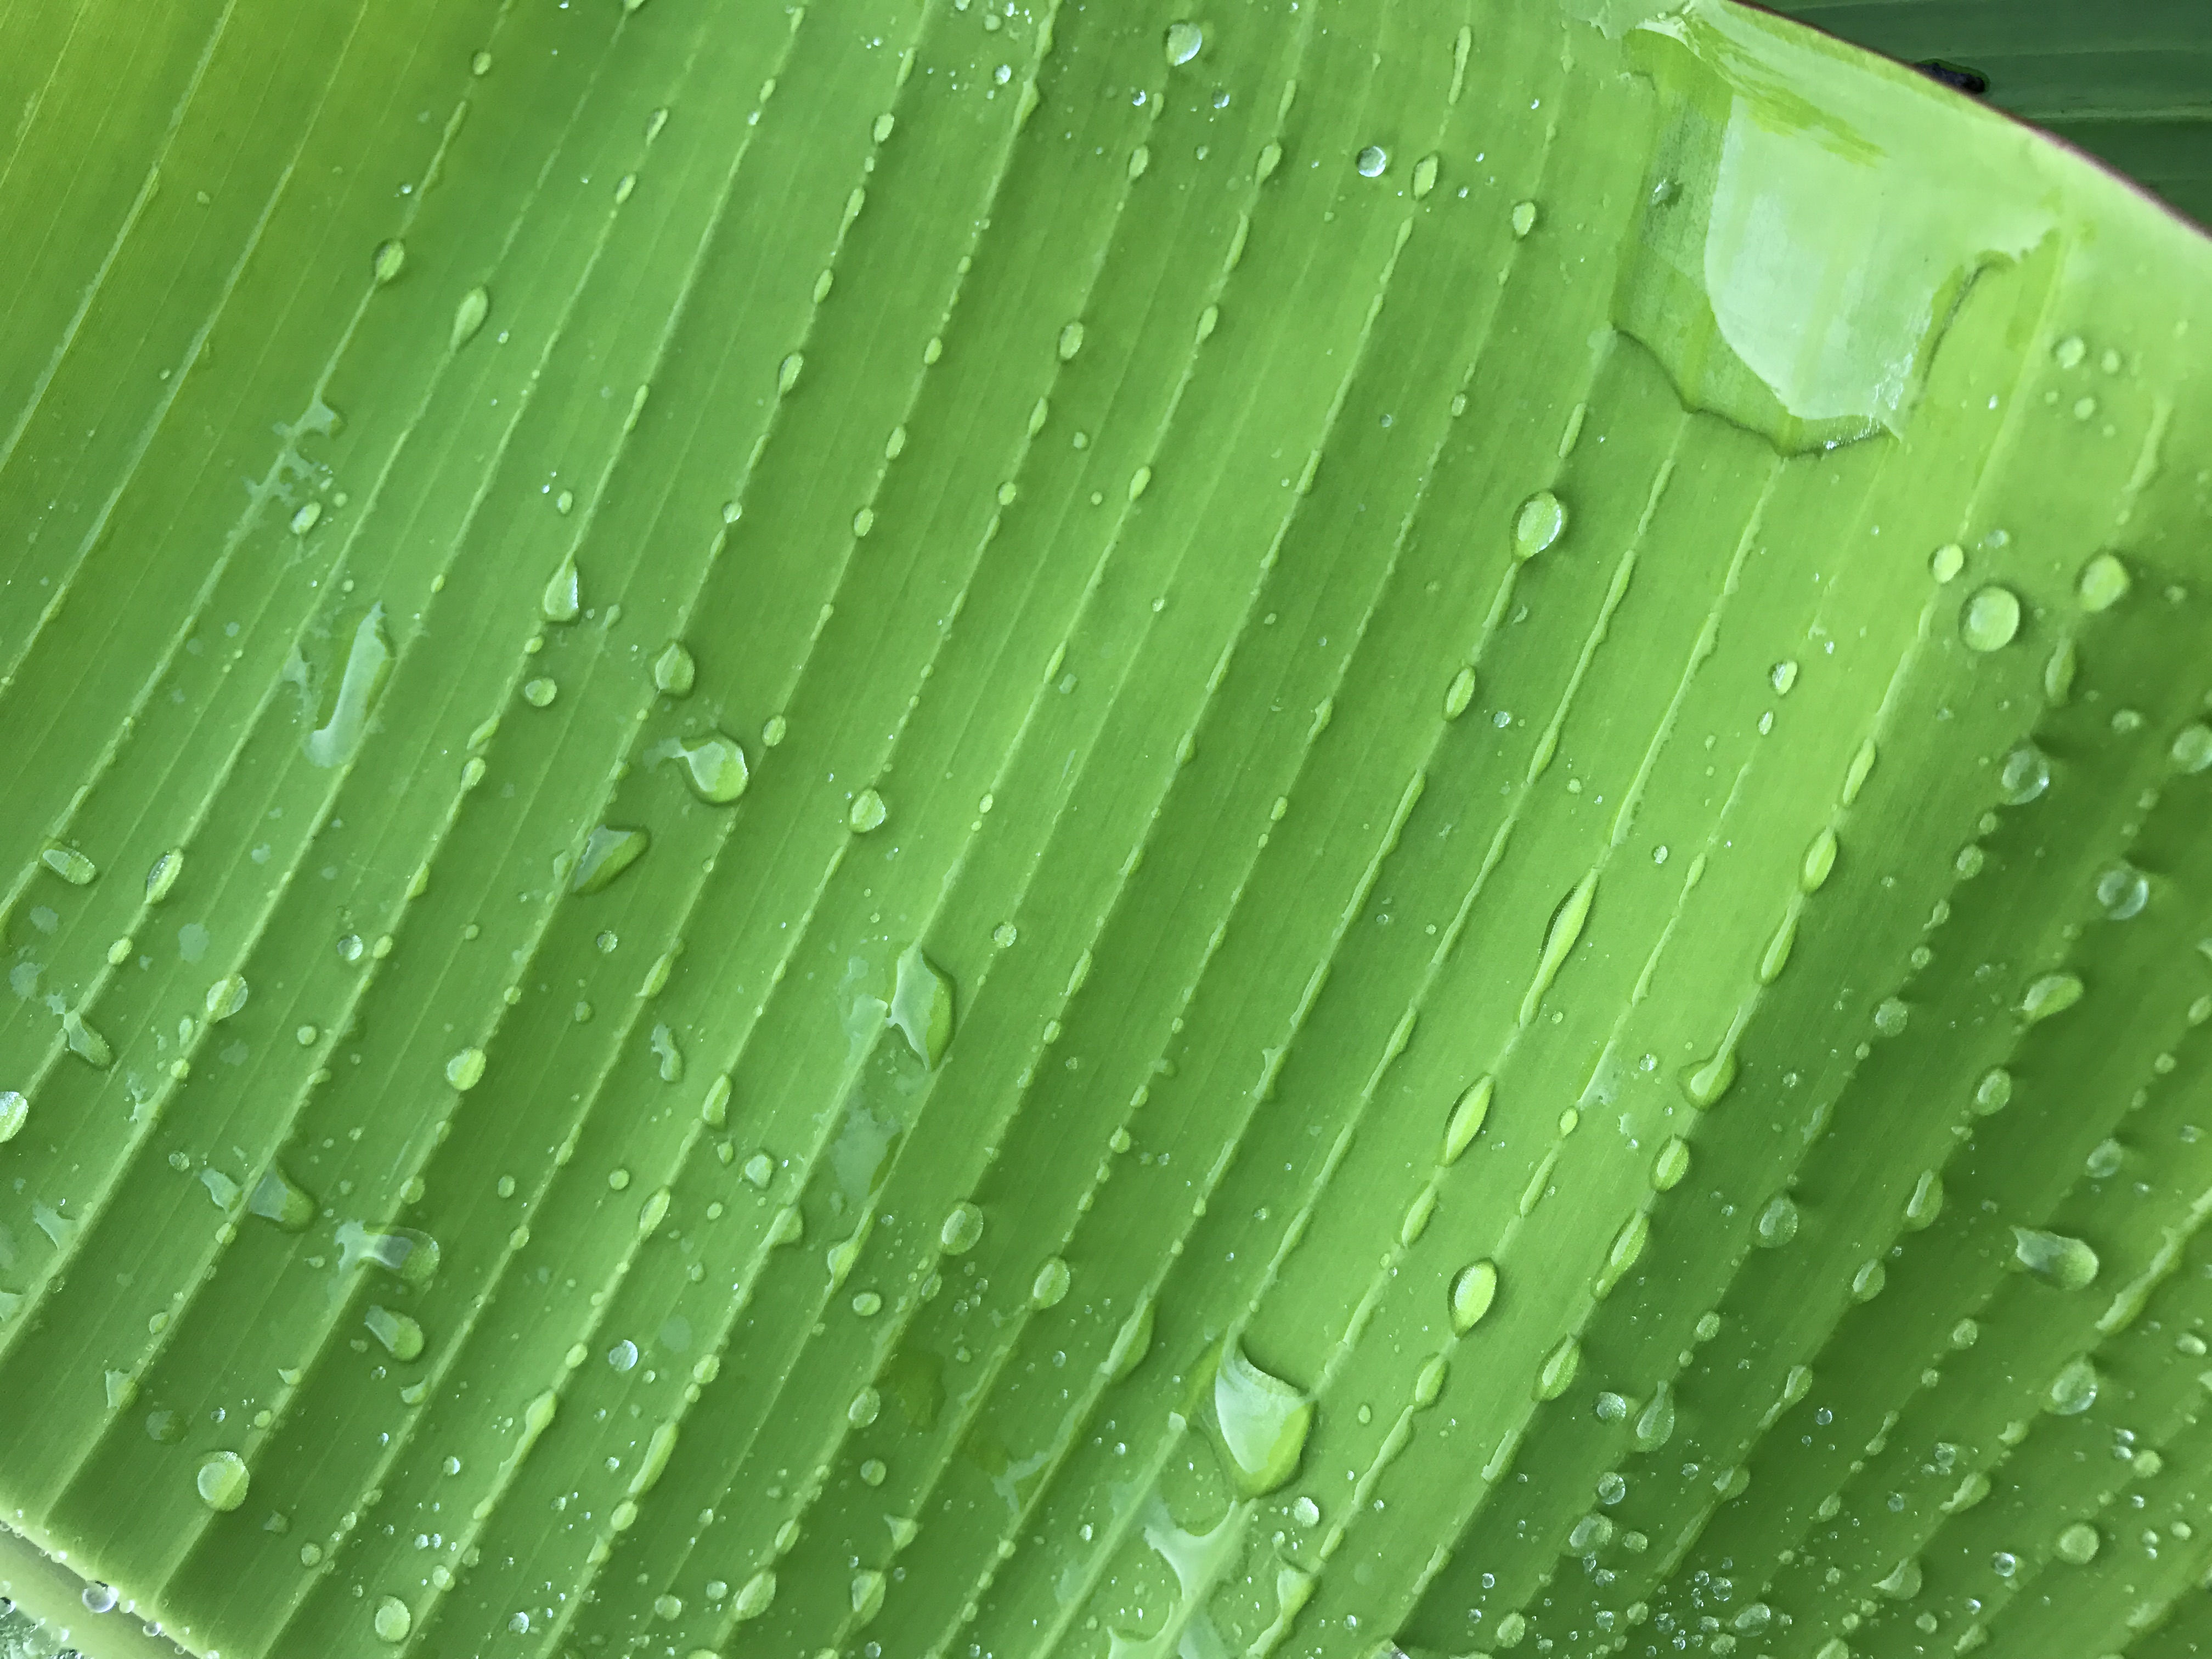 Close up on a portion of a banana leaf with rain droplets collecting on it